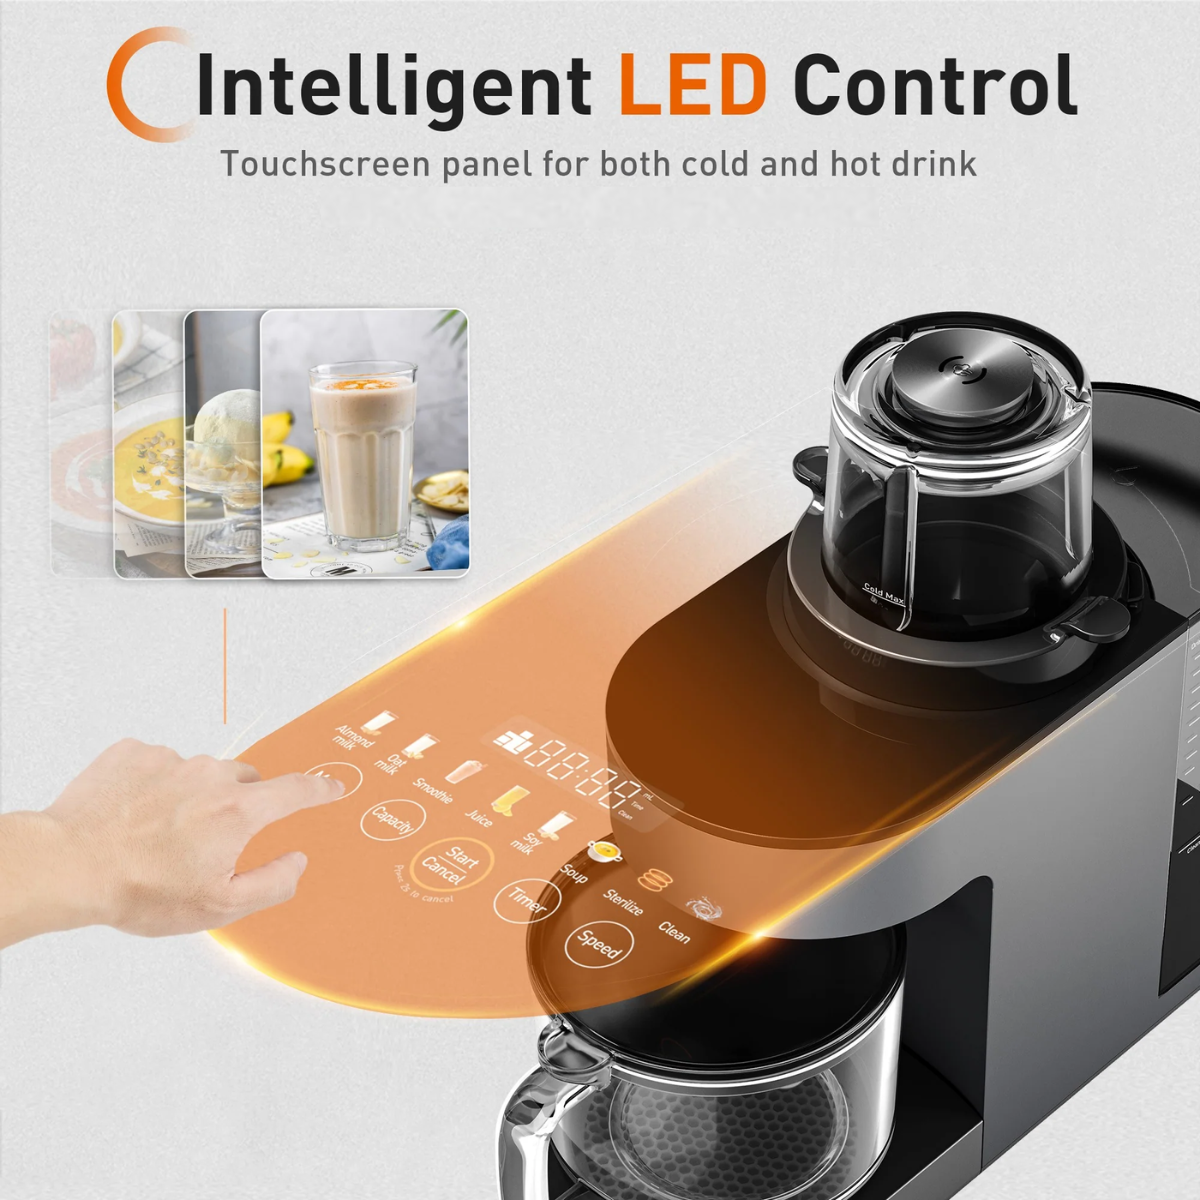 blender for shakes and smoothies with Intelligent LED Control